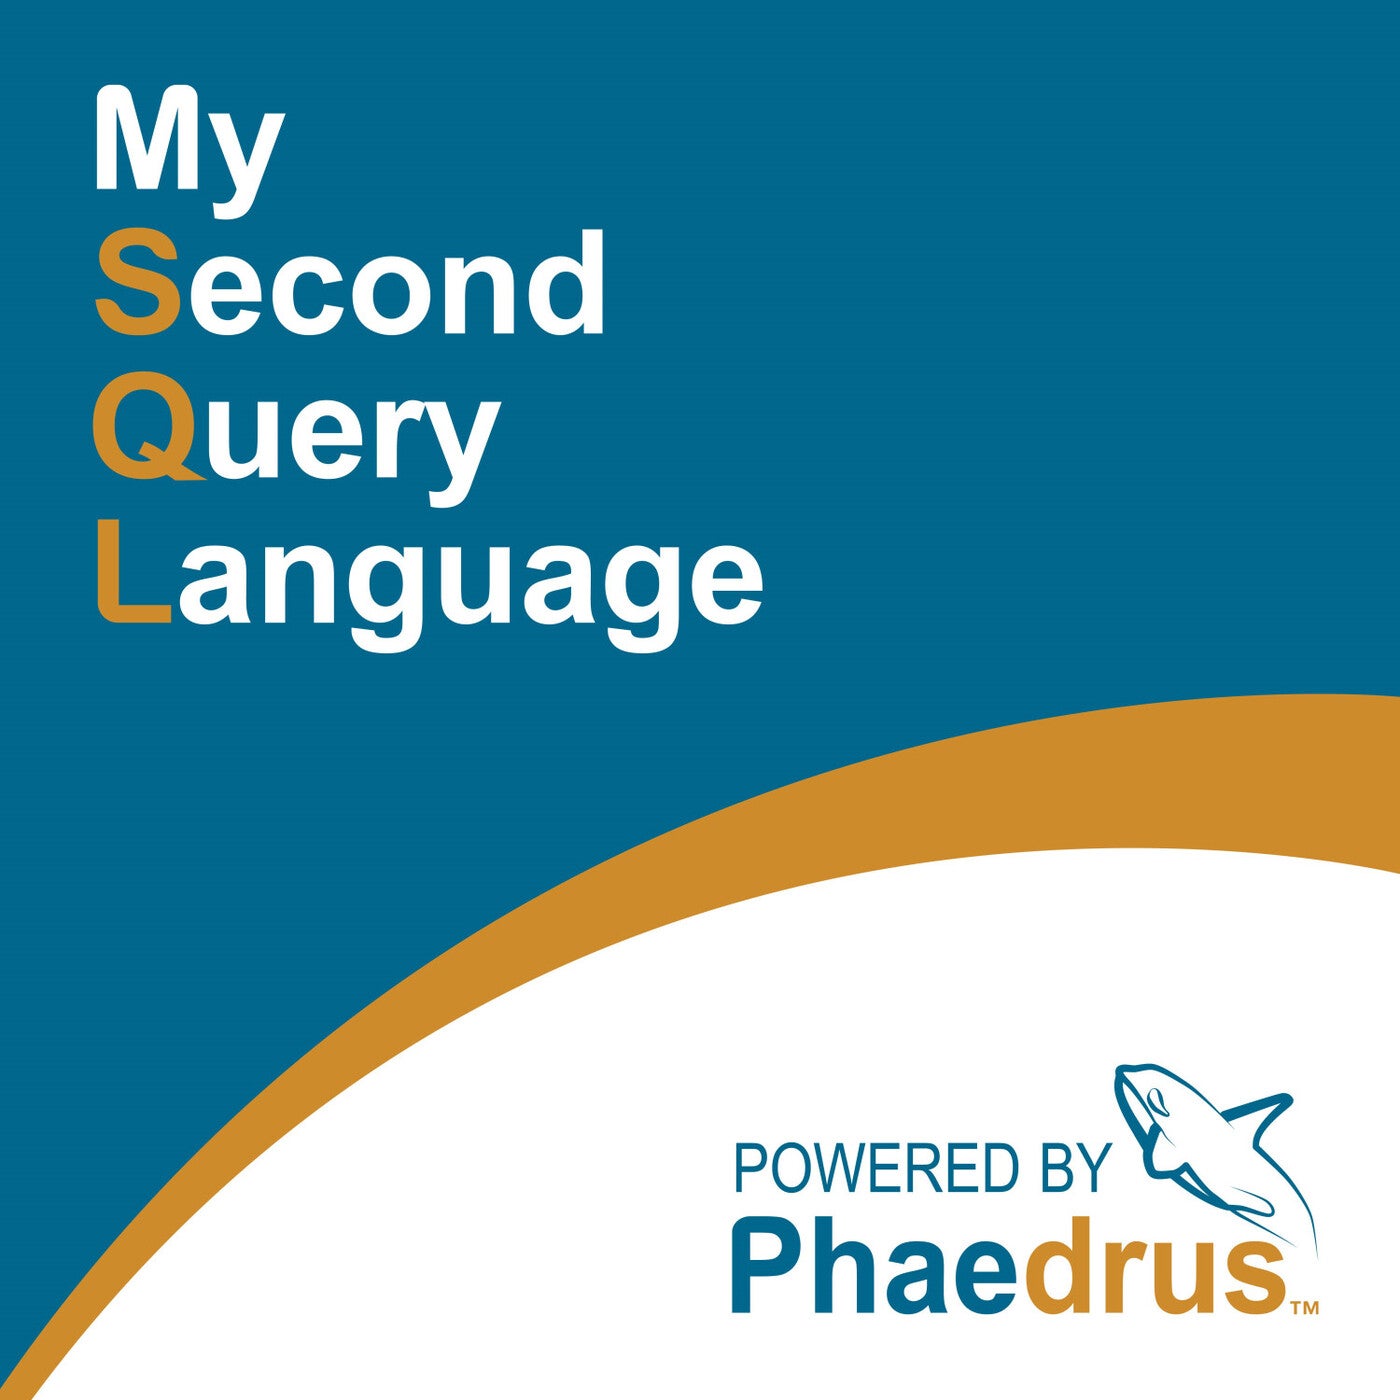 My Second Query Language